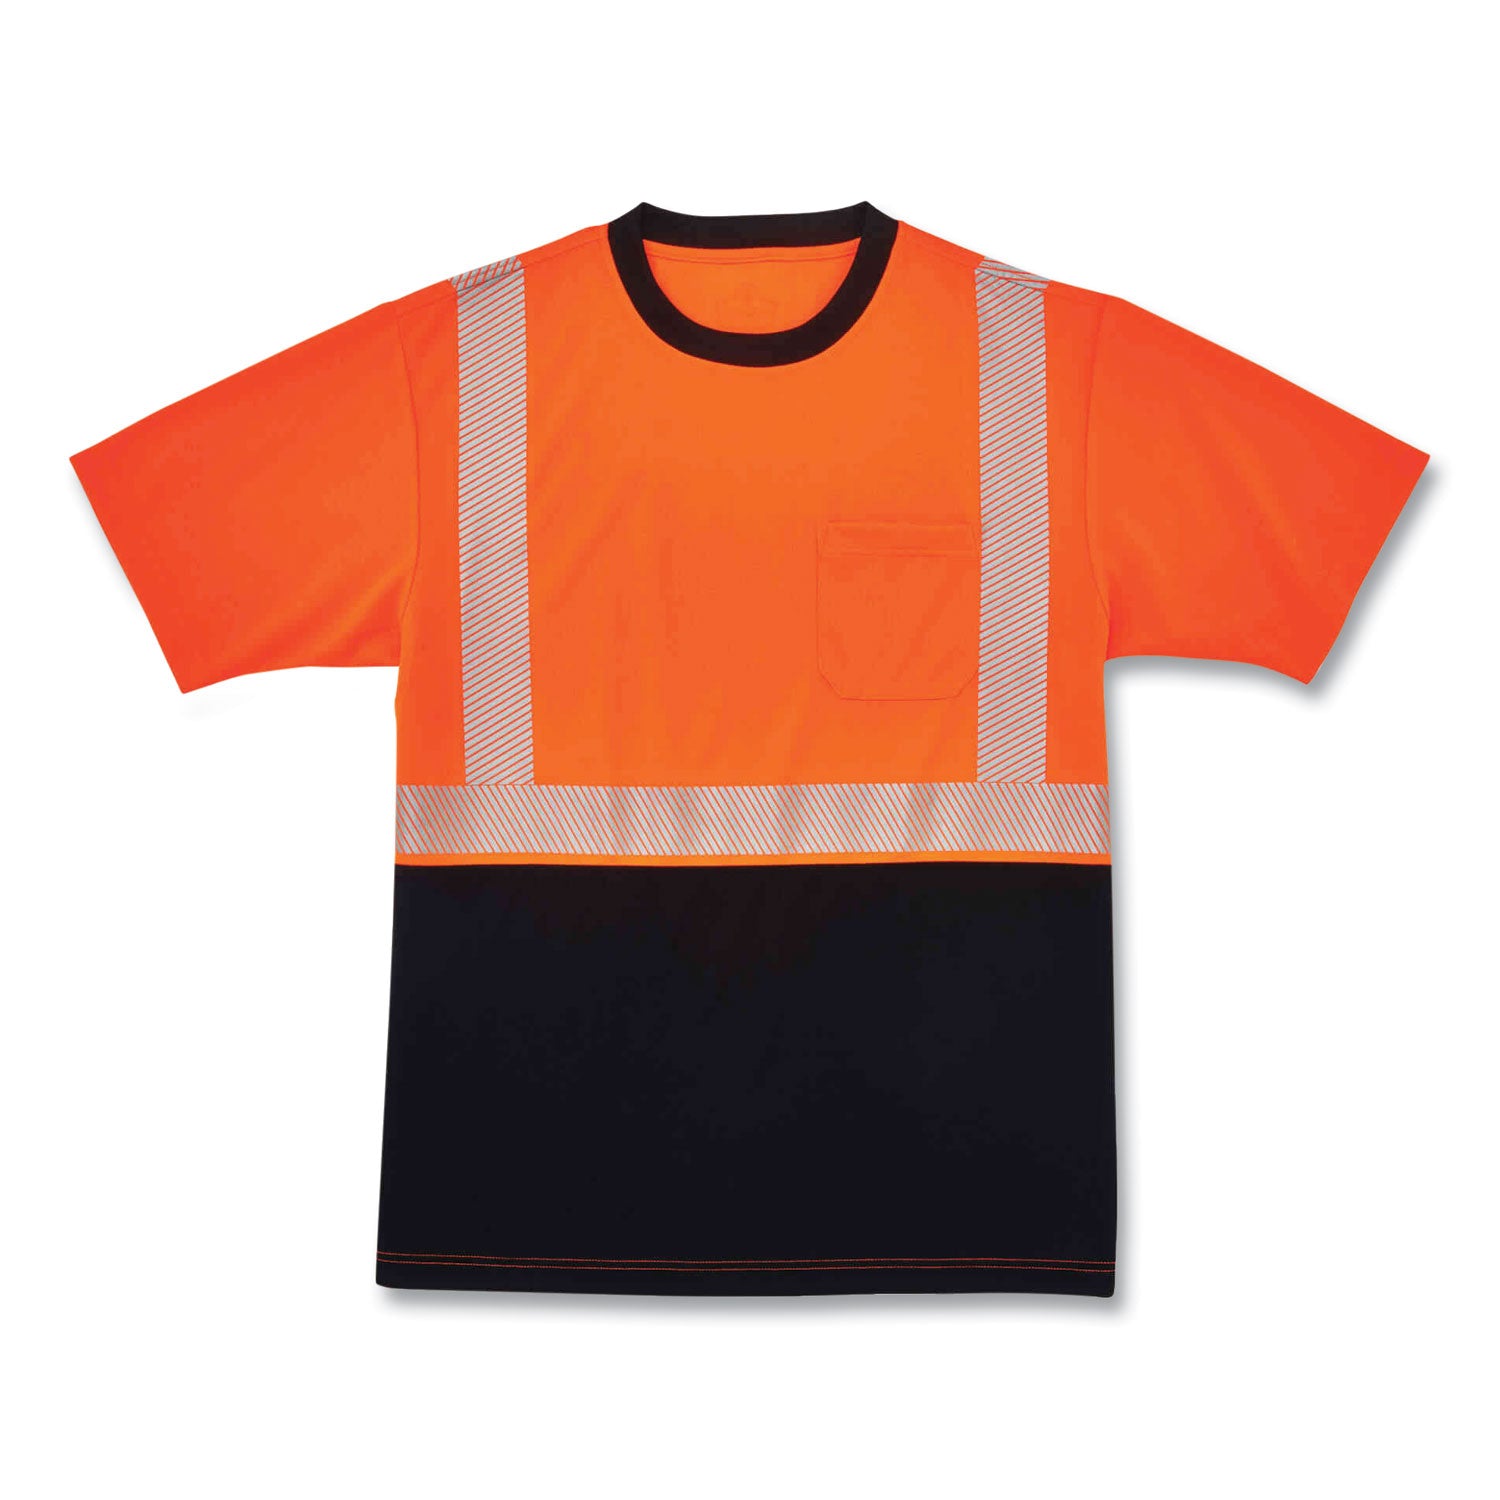 glowear-8280bk-class-2-performance-t-shirt-with-black-bottom-polyester-3x-large-orange-ships-in-1-3-business-days_ego22587 - 1